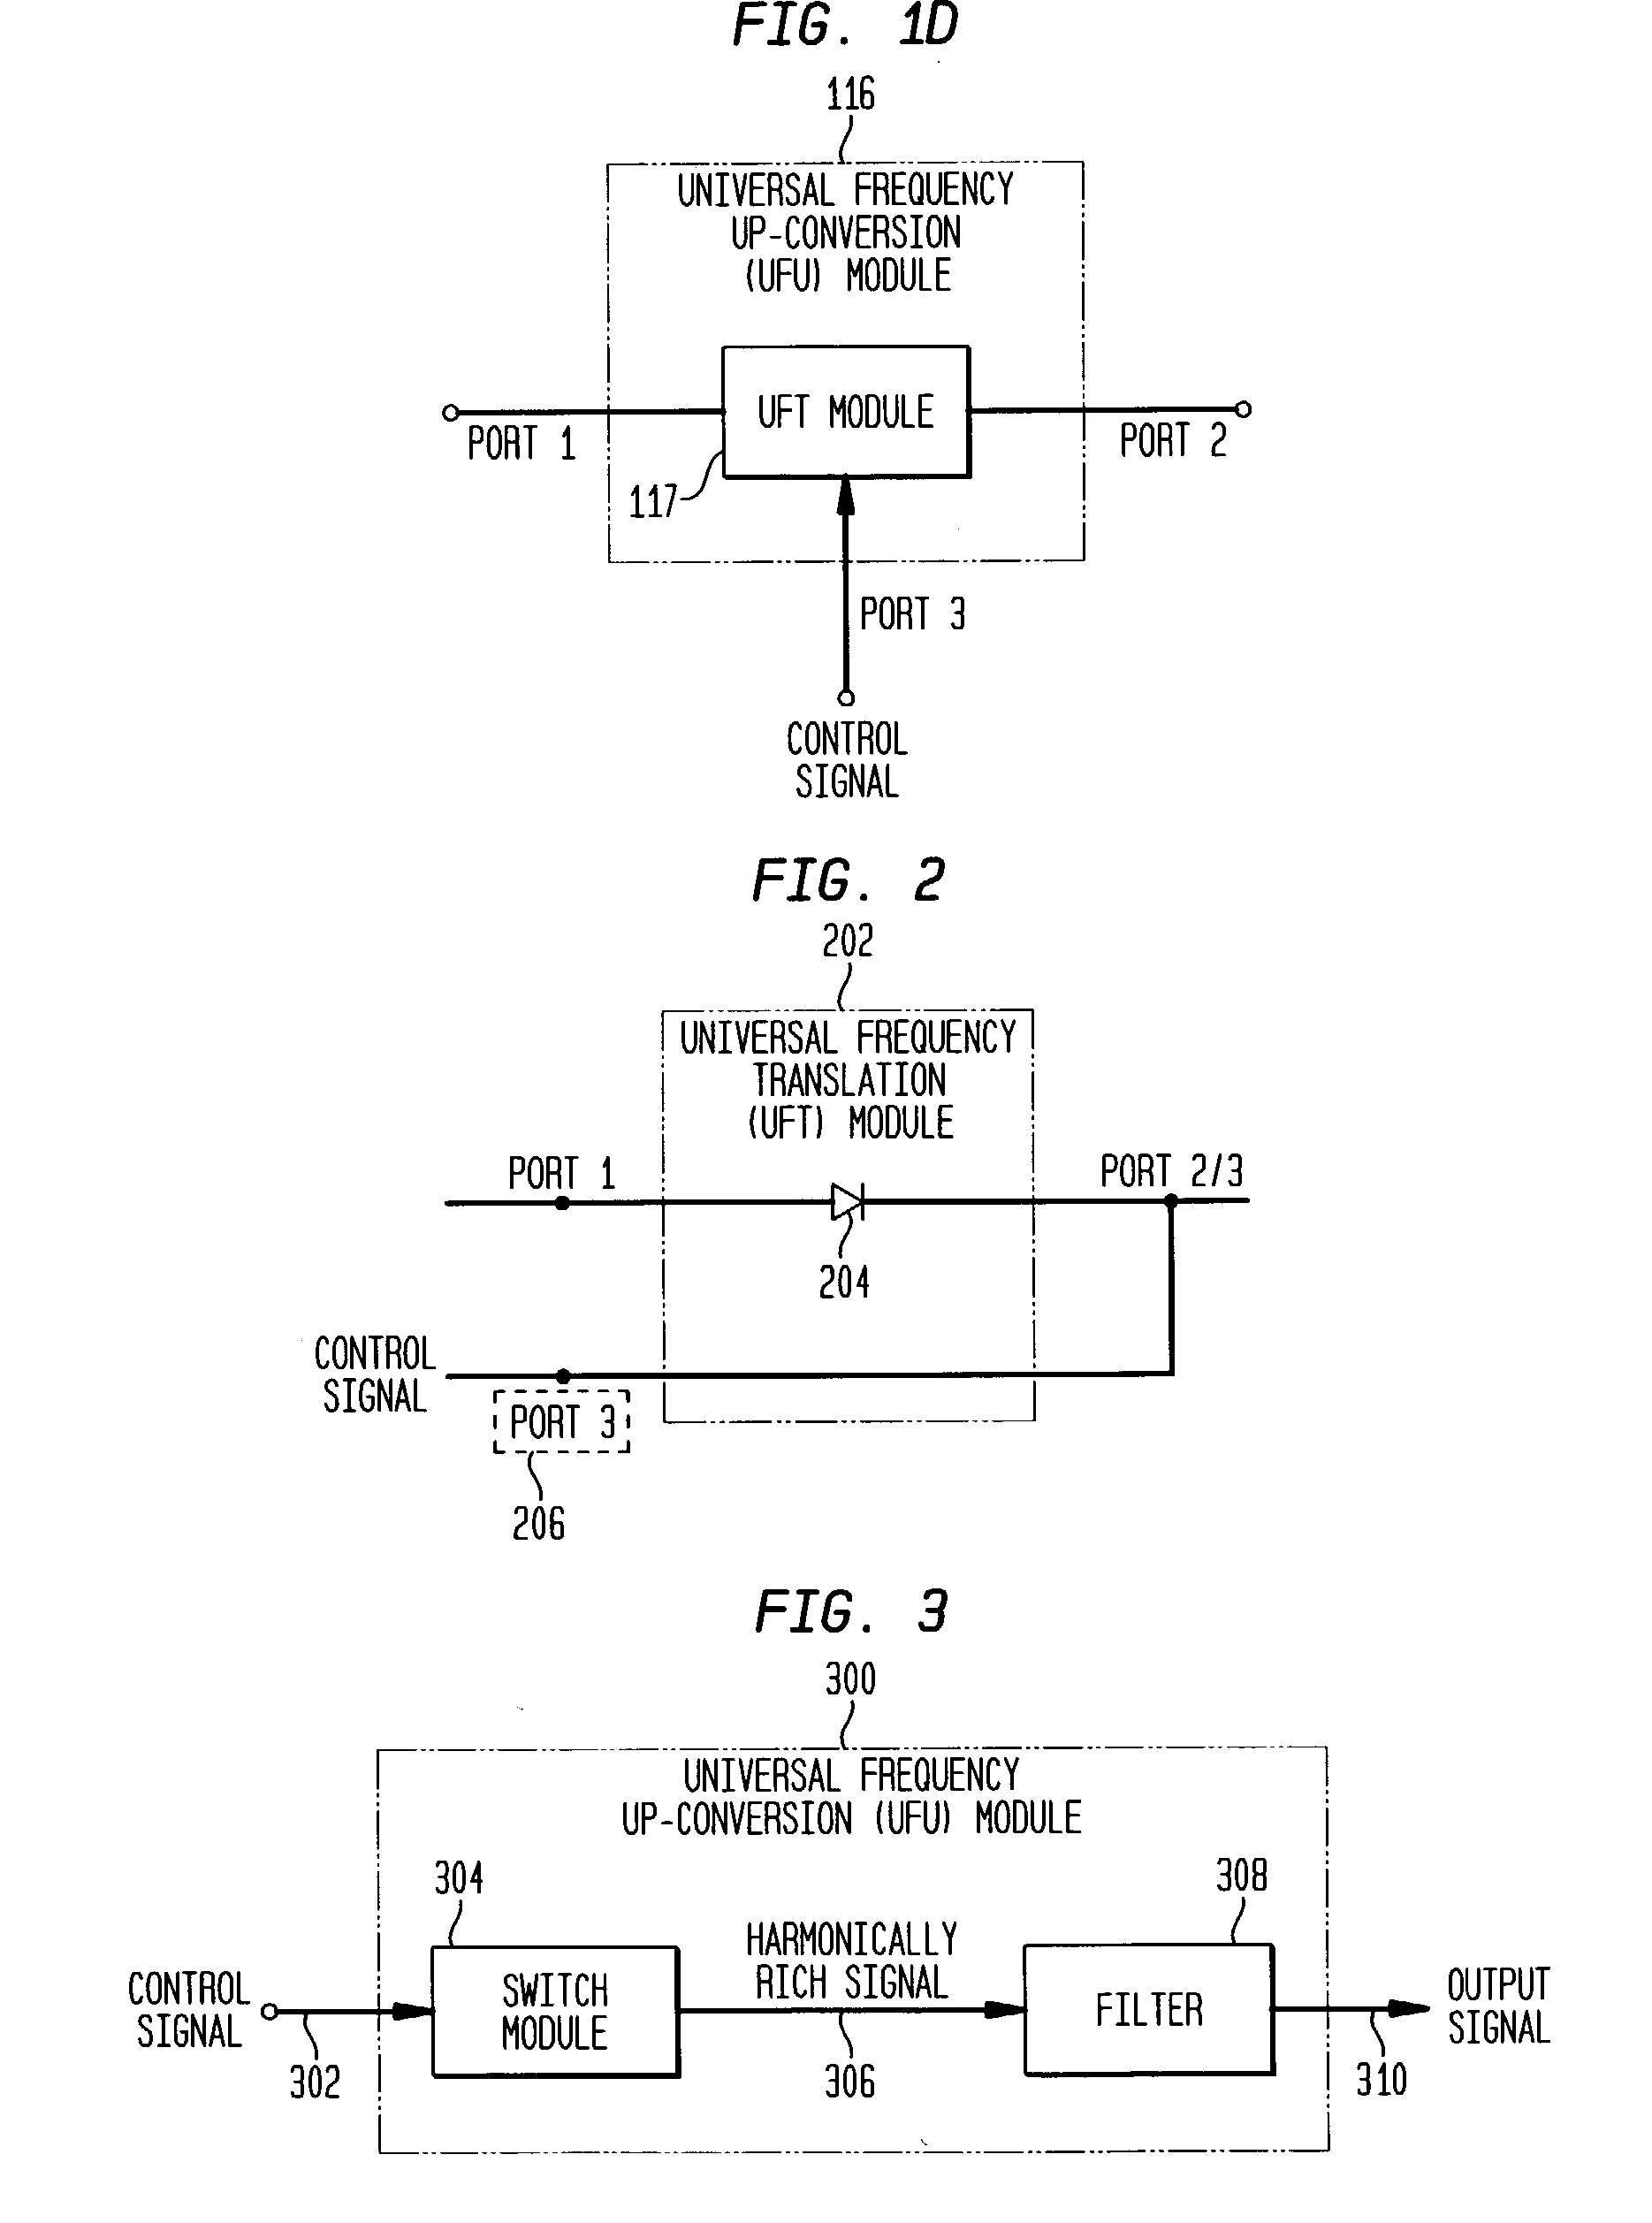 Method and apparatus for improving dynamic range in a communication system